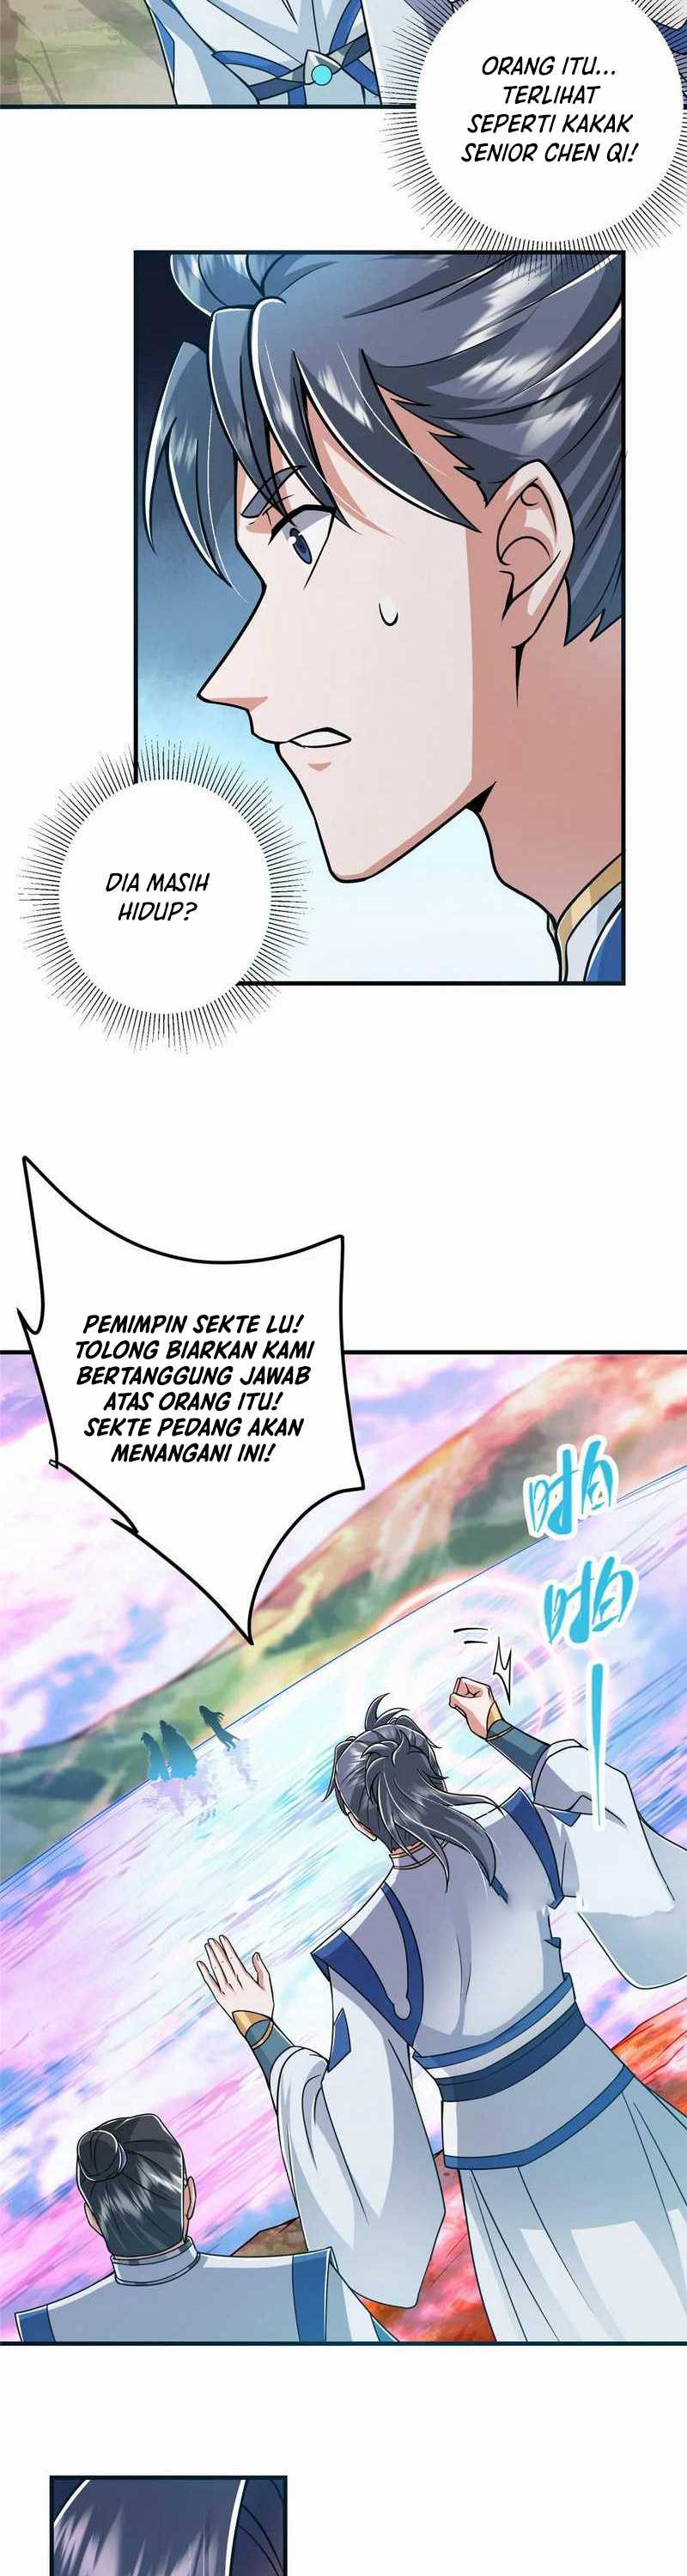 Keep A Low Profile, Sect Leader Chapter 220 Bahasa Indonesia